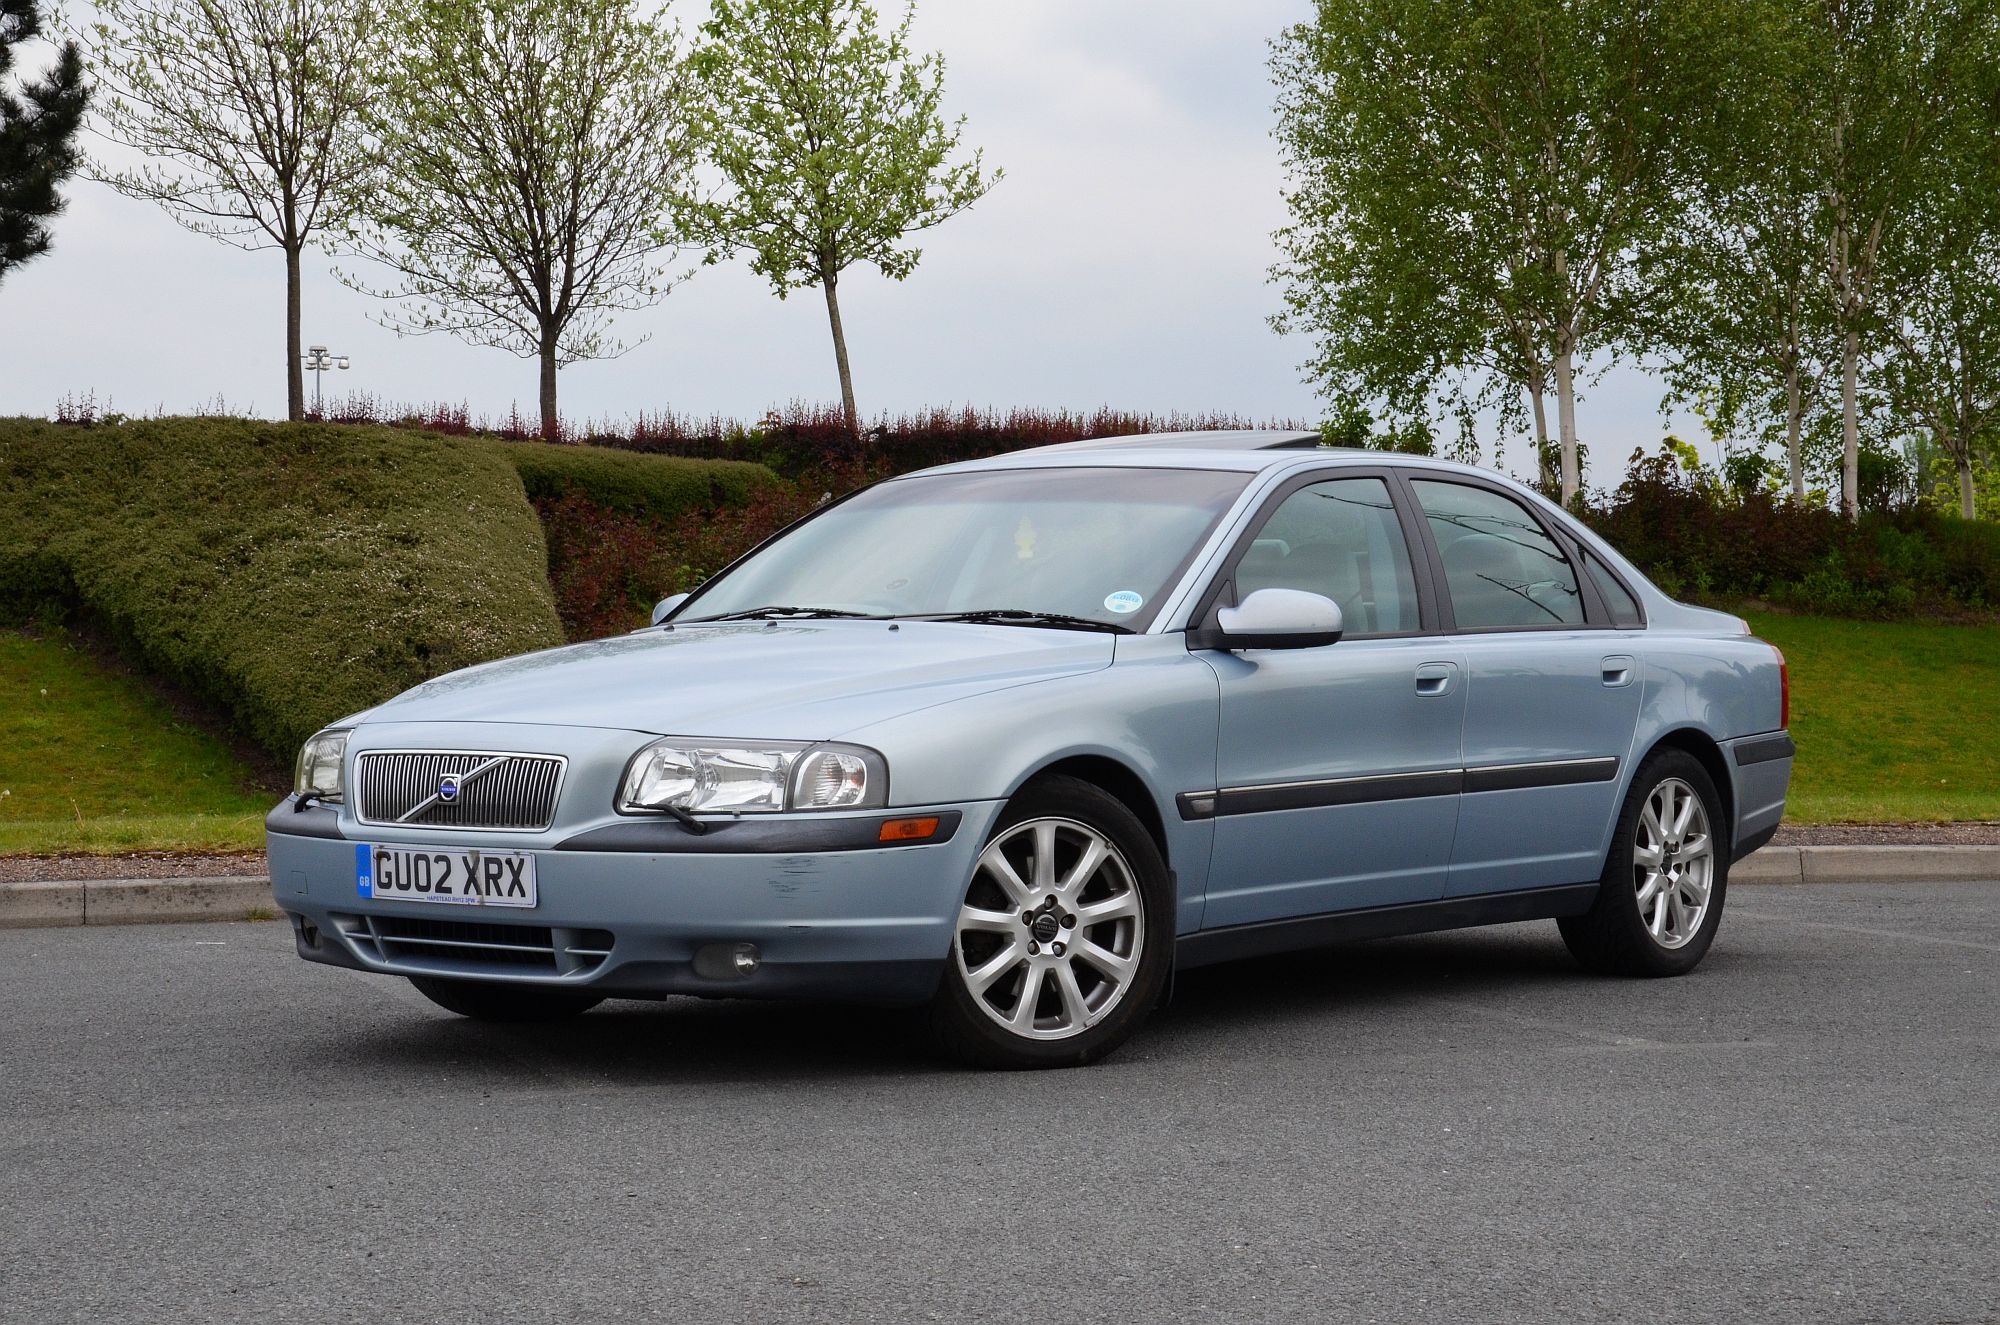 File:Volvo S80 2.4T 2002 Blue, front.jpg - Wikimedia Commons